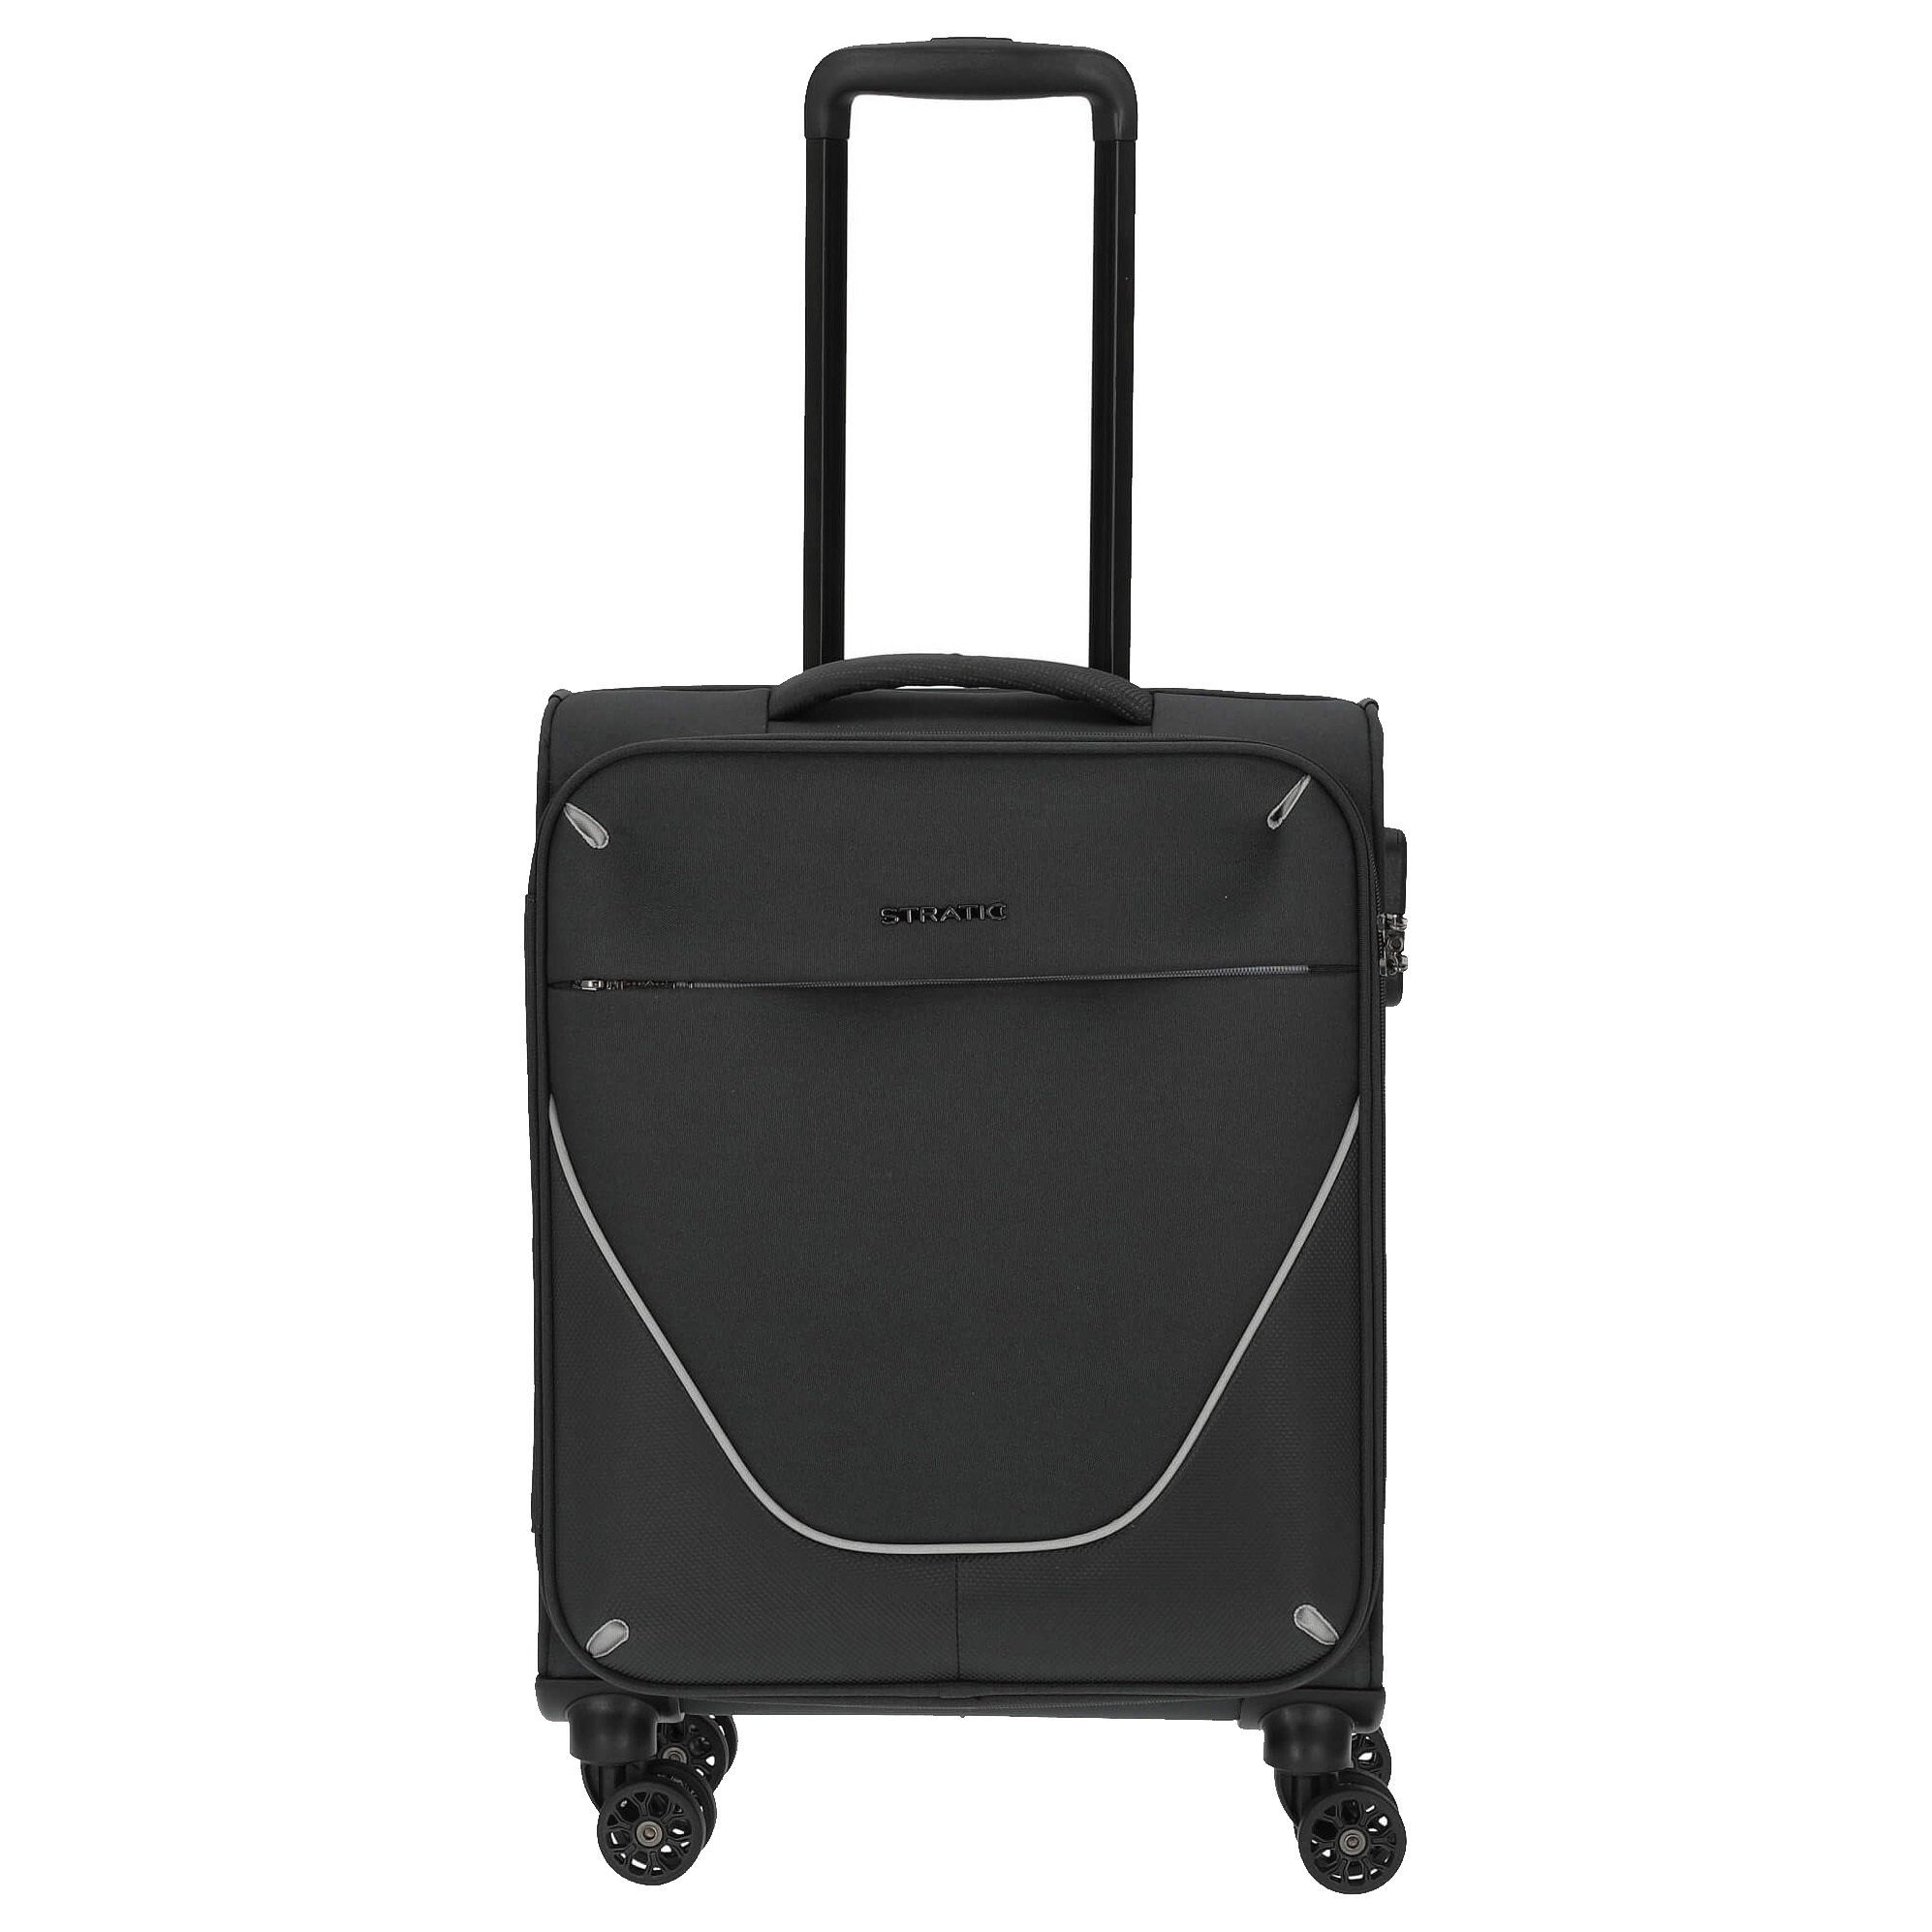 Stratic Trolley Strong - 4 S cm, Rollen 55 anthracite 4-Rollen-Trolley